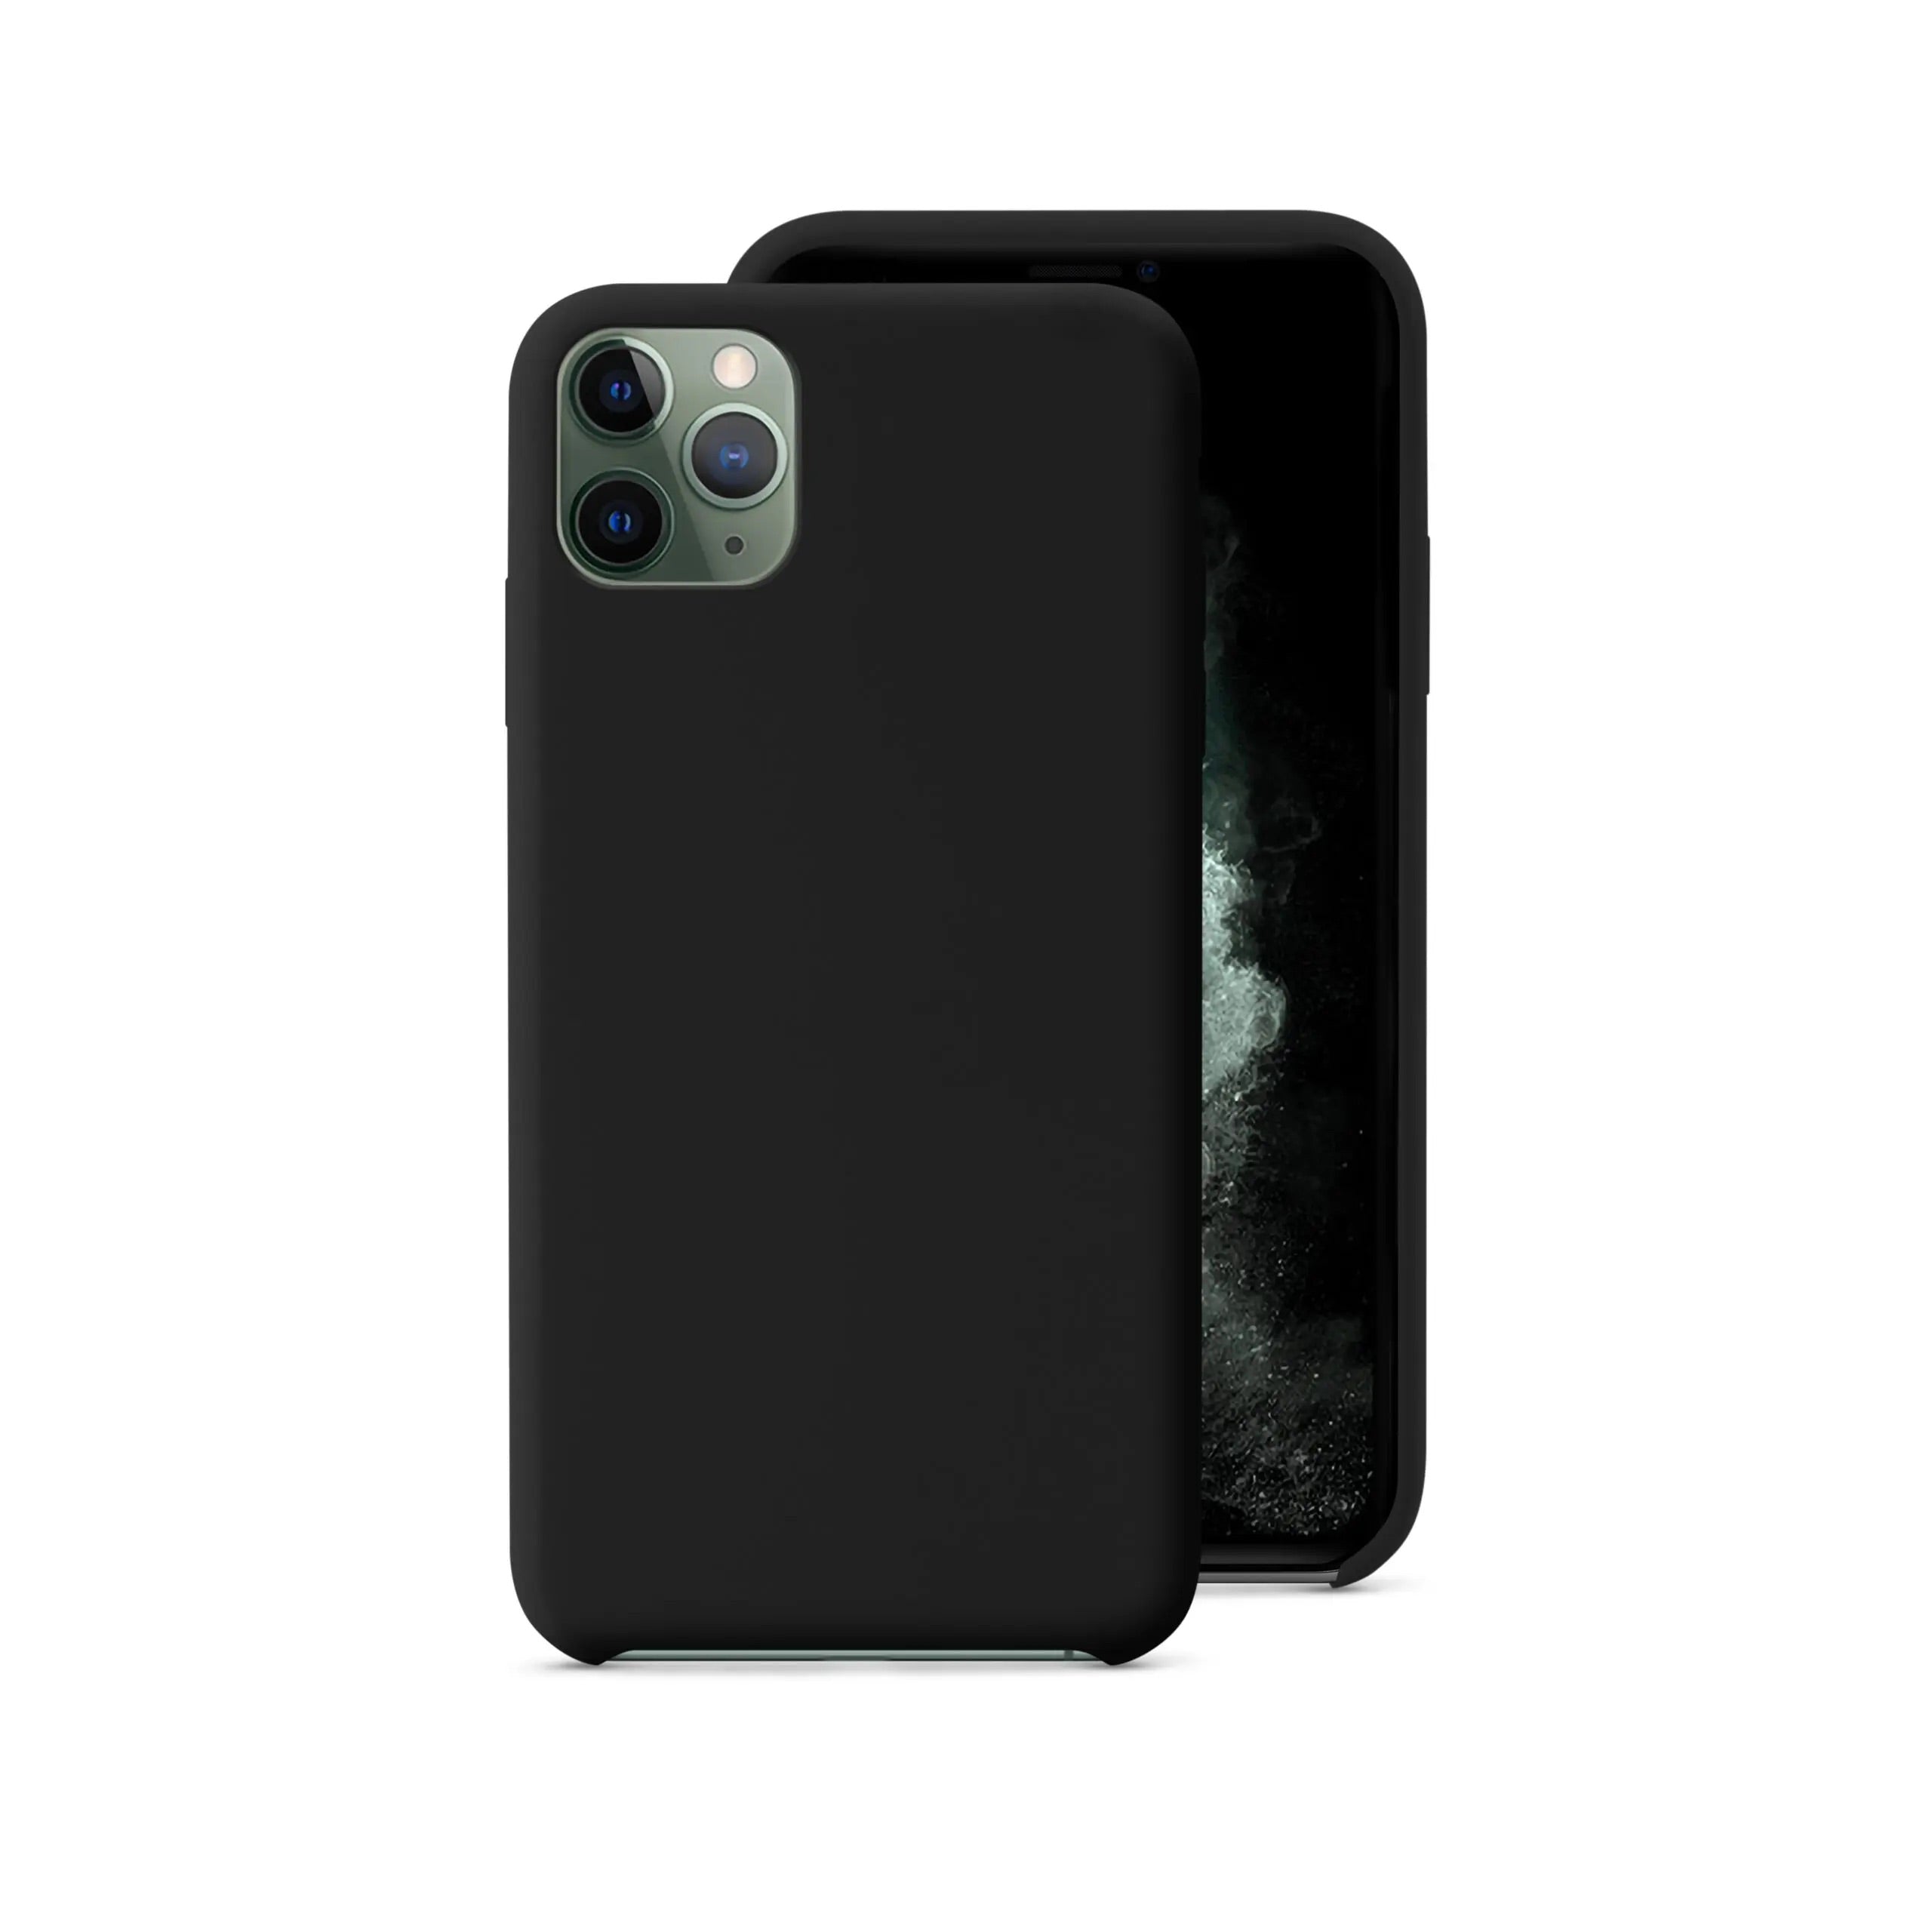 iPhone 11 Pro Silicone Case with Wireless Charging Support